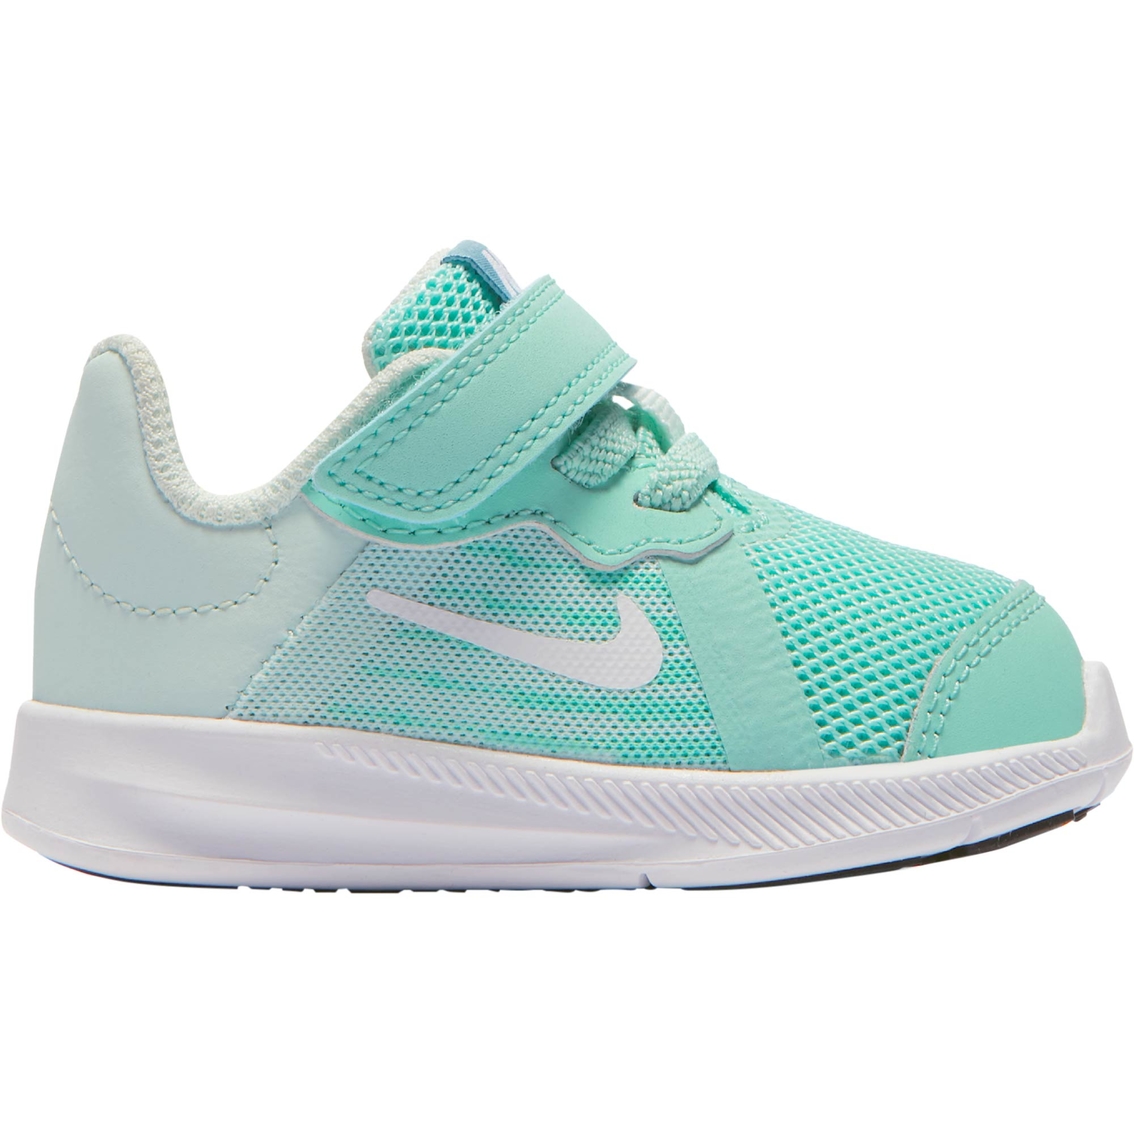 Nike Toddler Girls Downshifter 8 Running Shoes | Athletic | Shoes ...